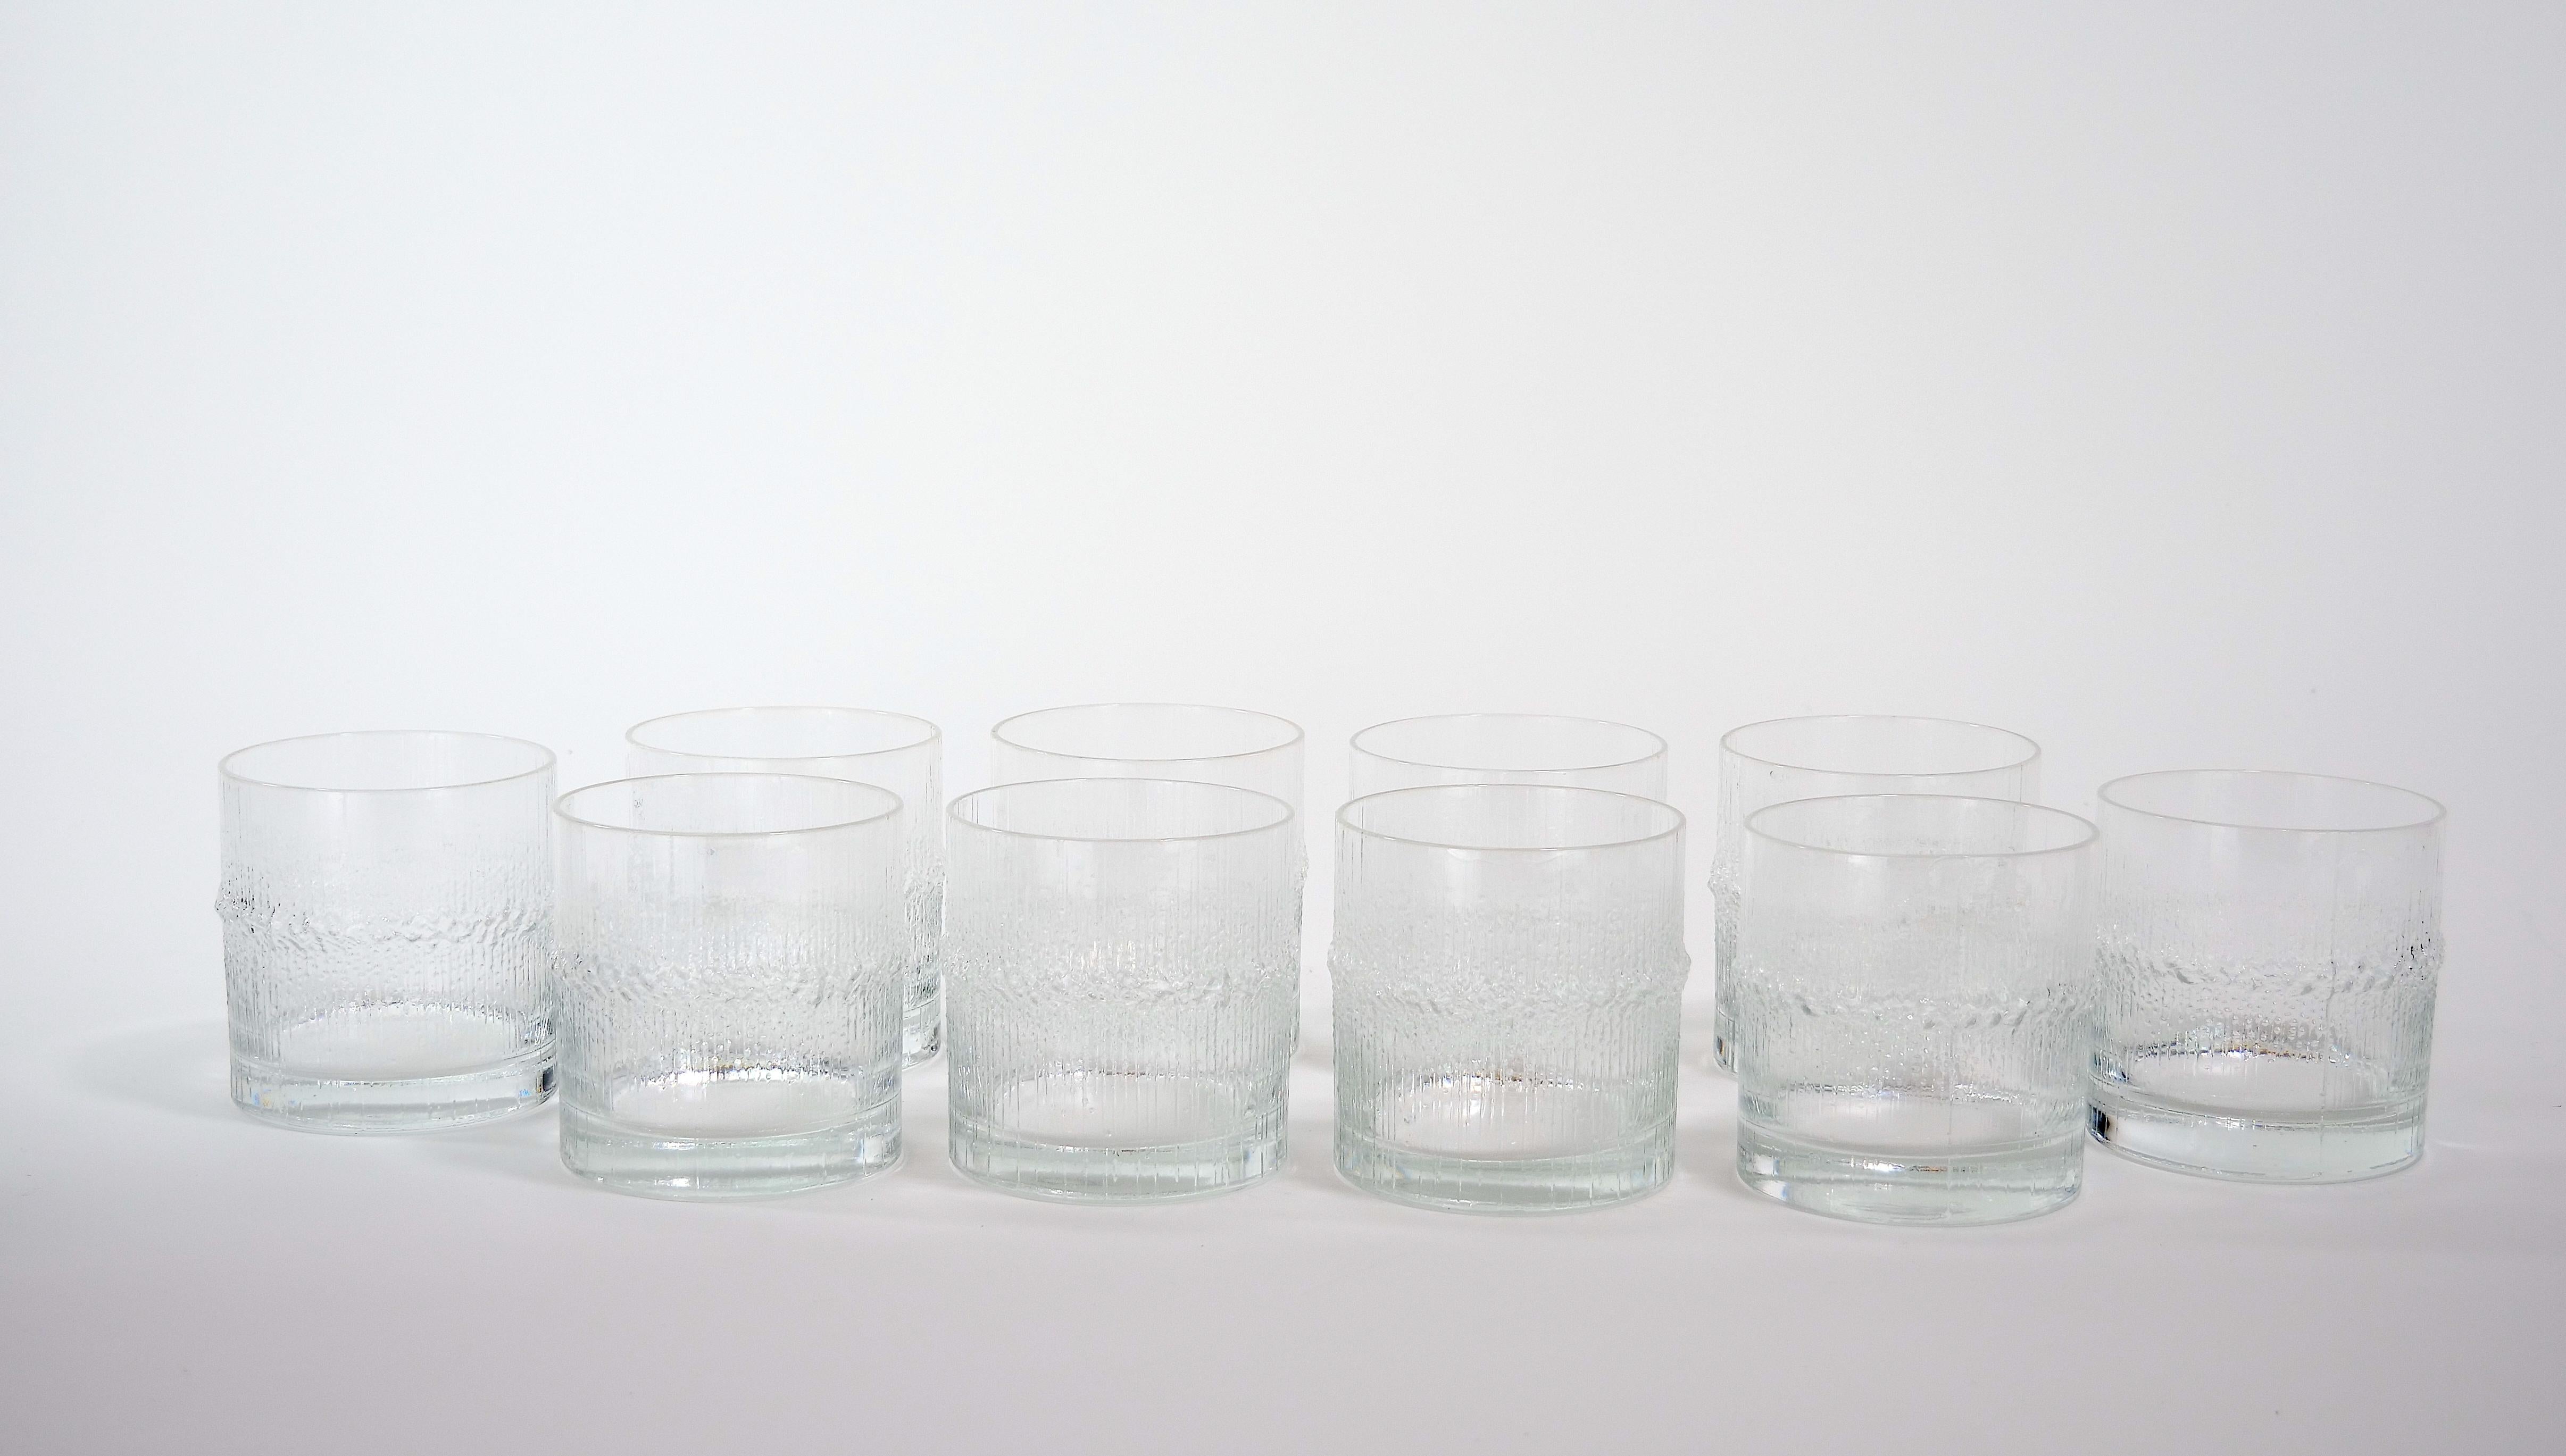 Mid-Century Modern beautiful whiskey and drinks barware / tableware service for 11 people. Each features an exterior particle ice crush design detail and resting on a flat round base. Each glass measures 3.5 inches high and 3.25 inches diameter.
   